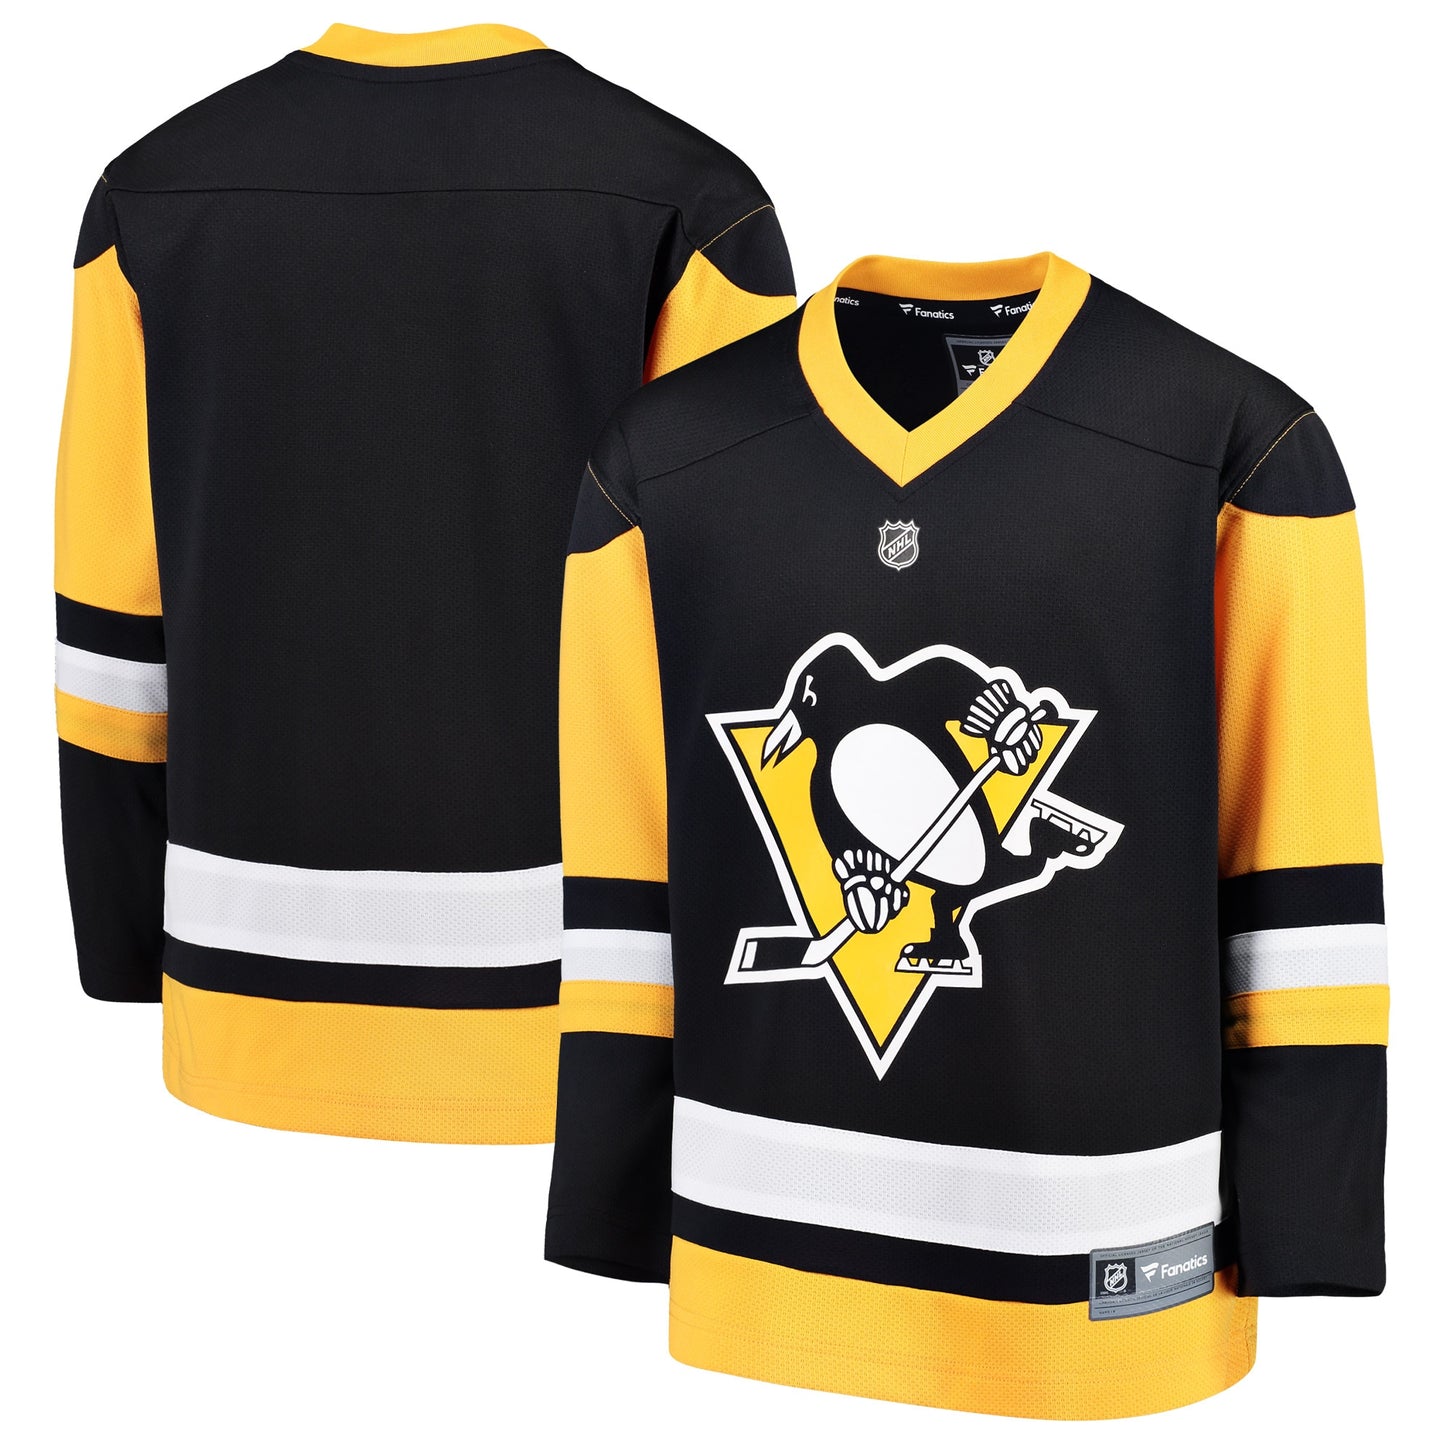 Pittsburgh Penguins Fanatics Branded Youth Home Replica Blank Jersey - Black